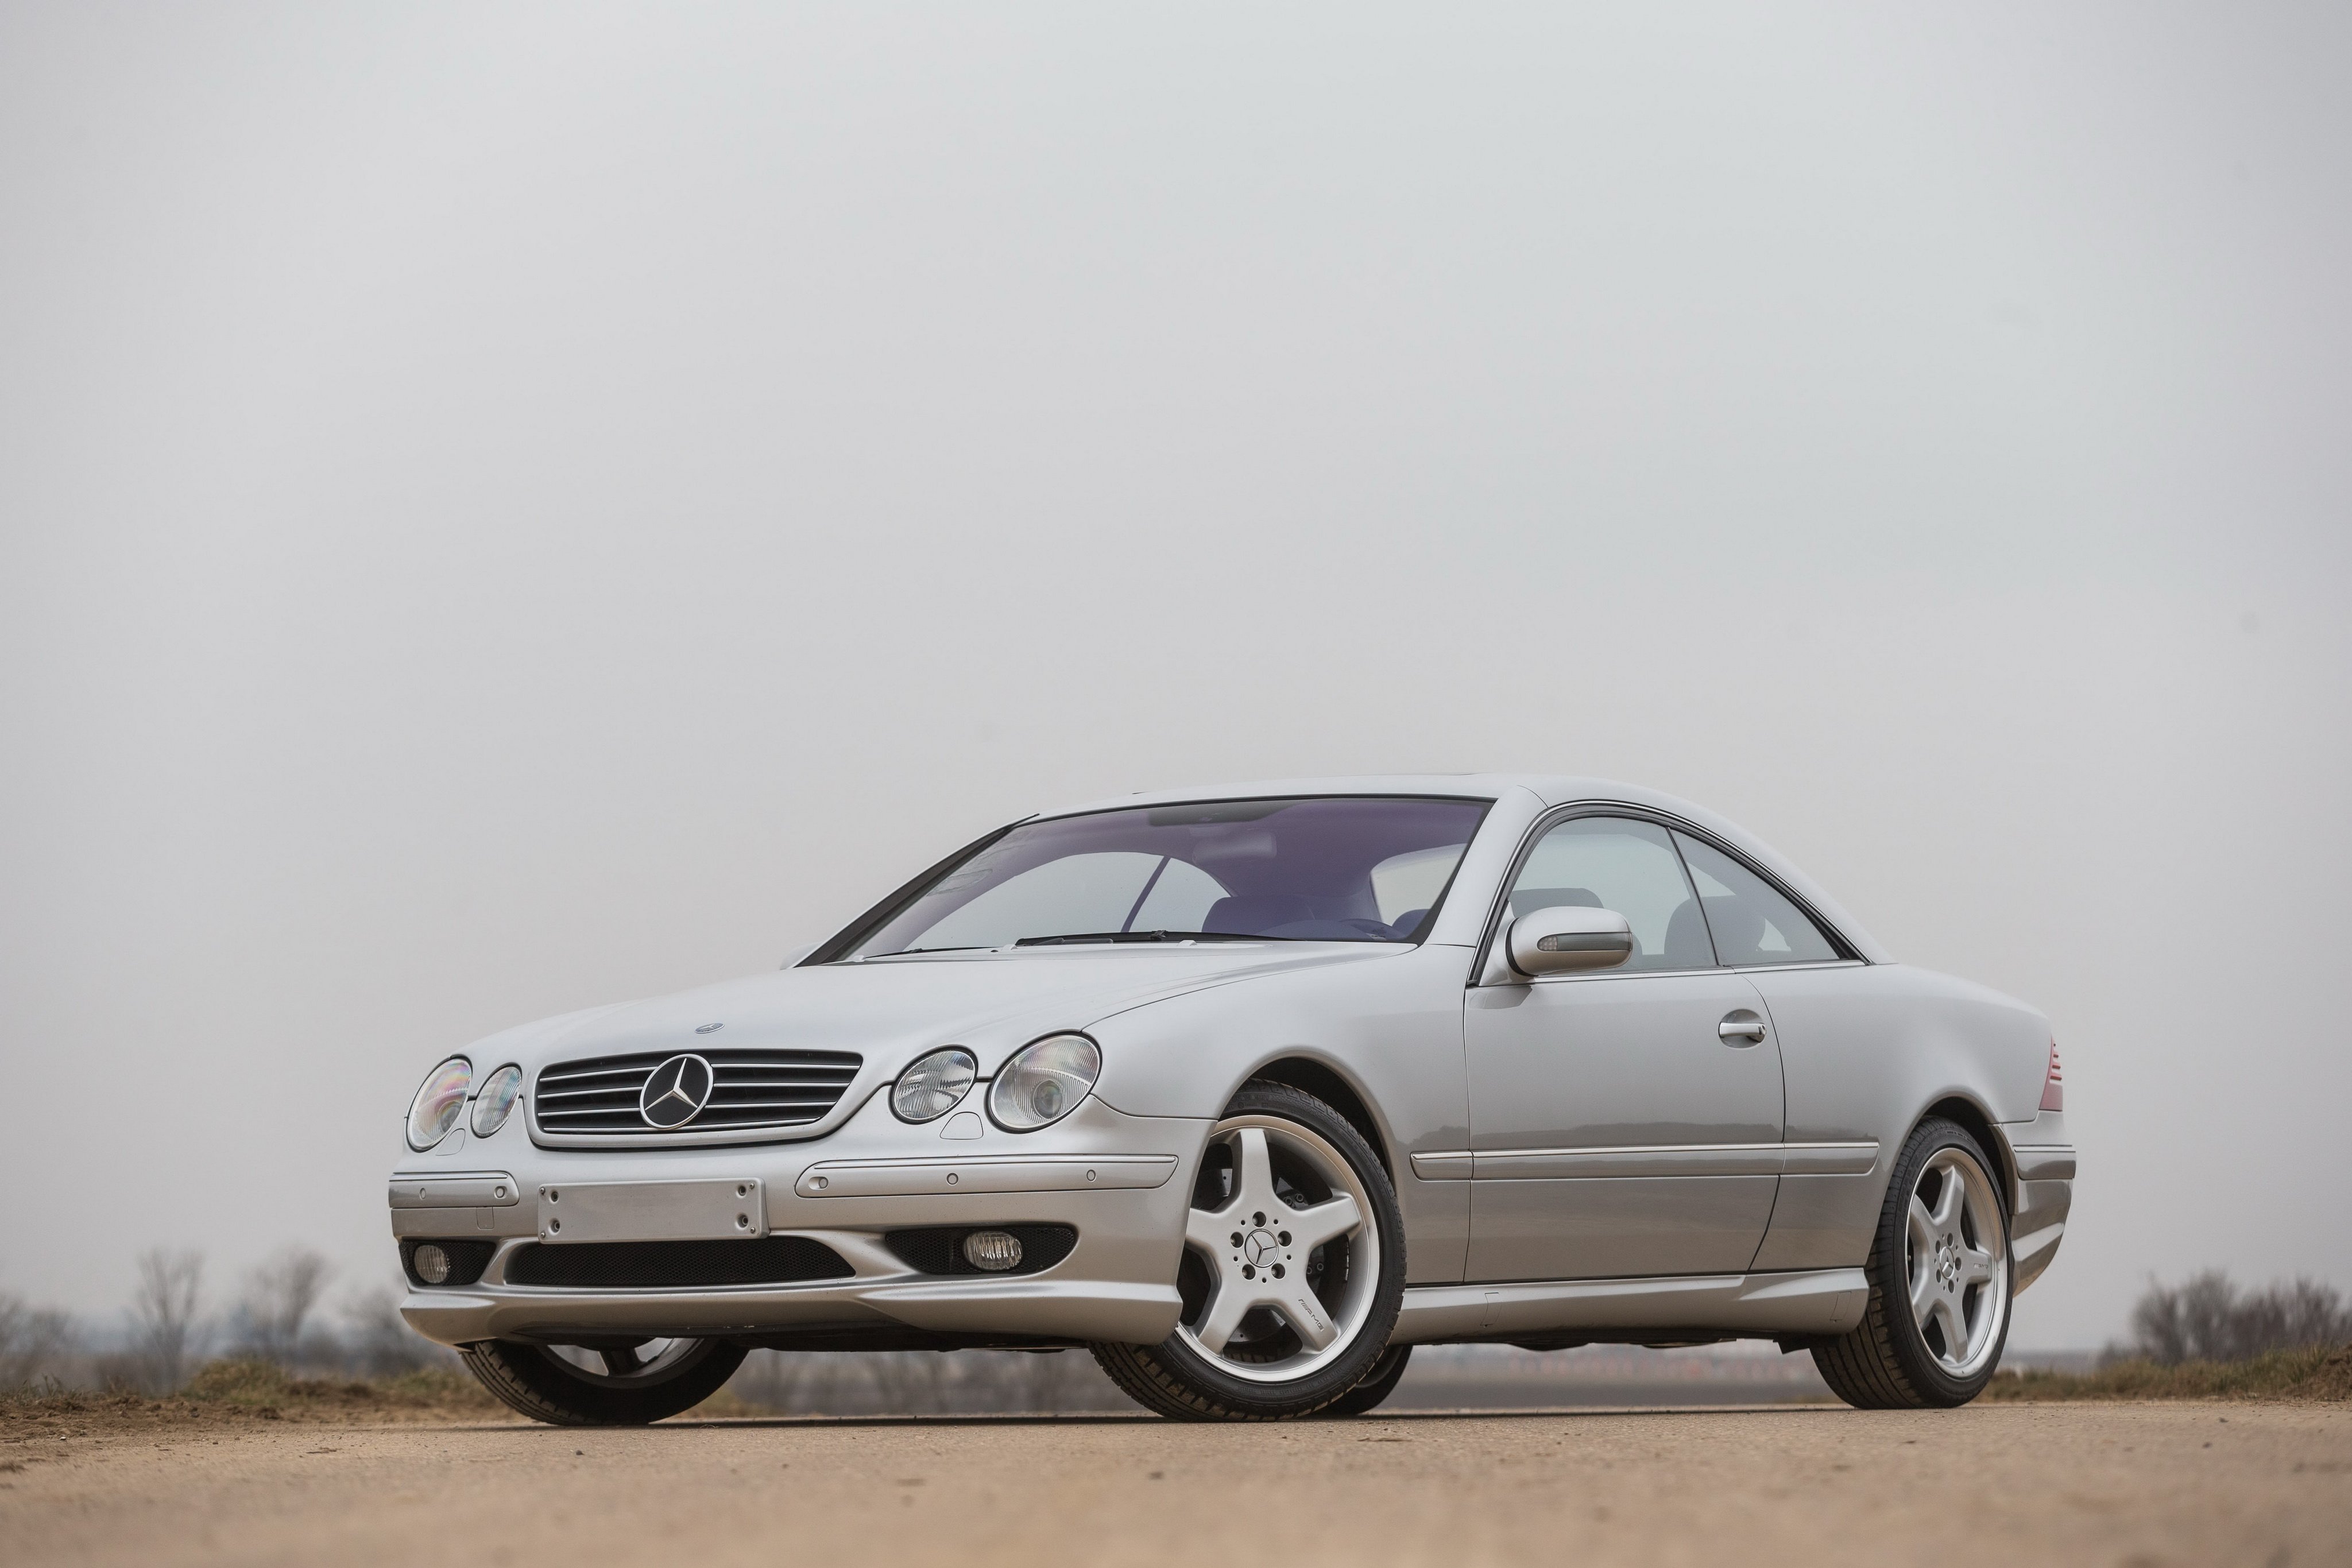 mercedes, Benz, Cl, 63, Amg, C215, 2001, Cars, Coupe Wallpaper